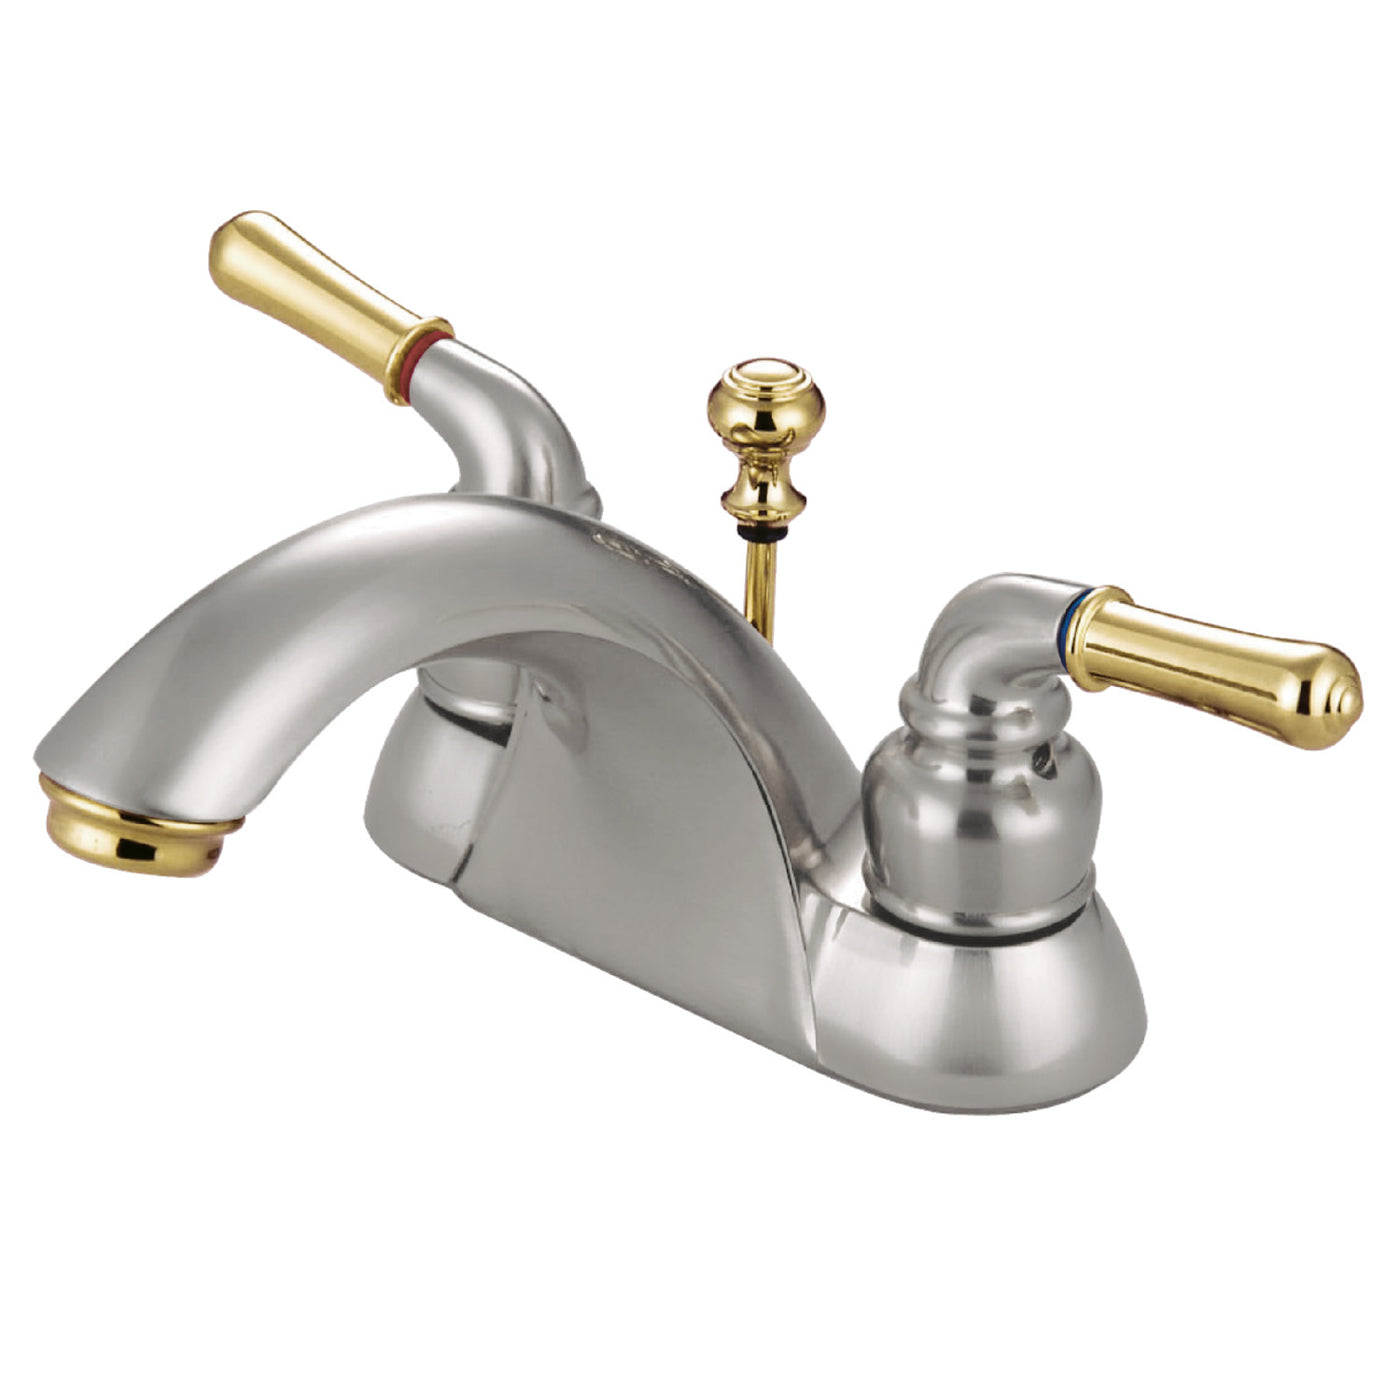 Elements of Design EB2629B 4-Inch Centerset Bathroom Faucet, Brushed Nickel/Polished Brass